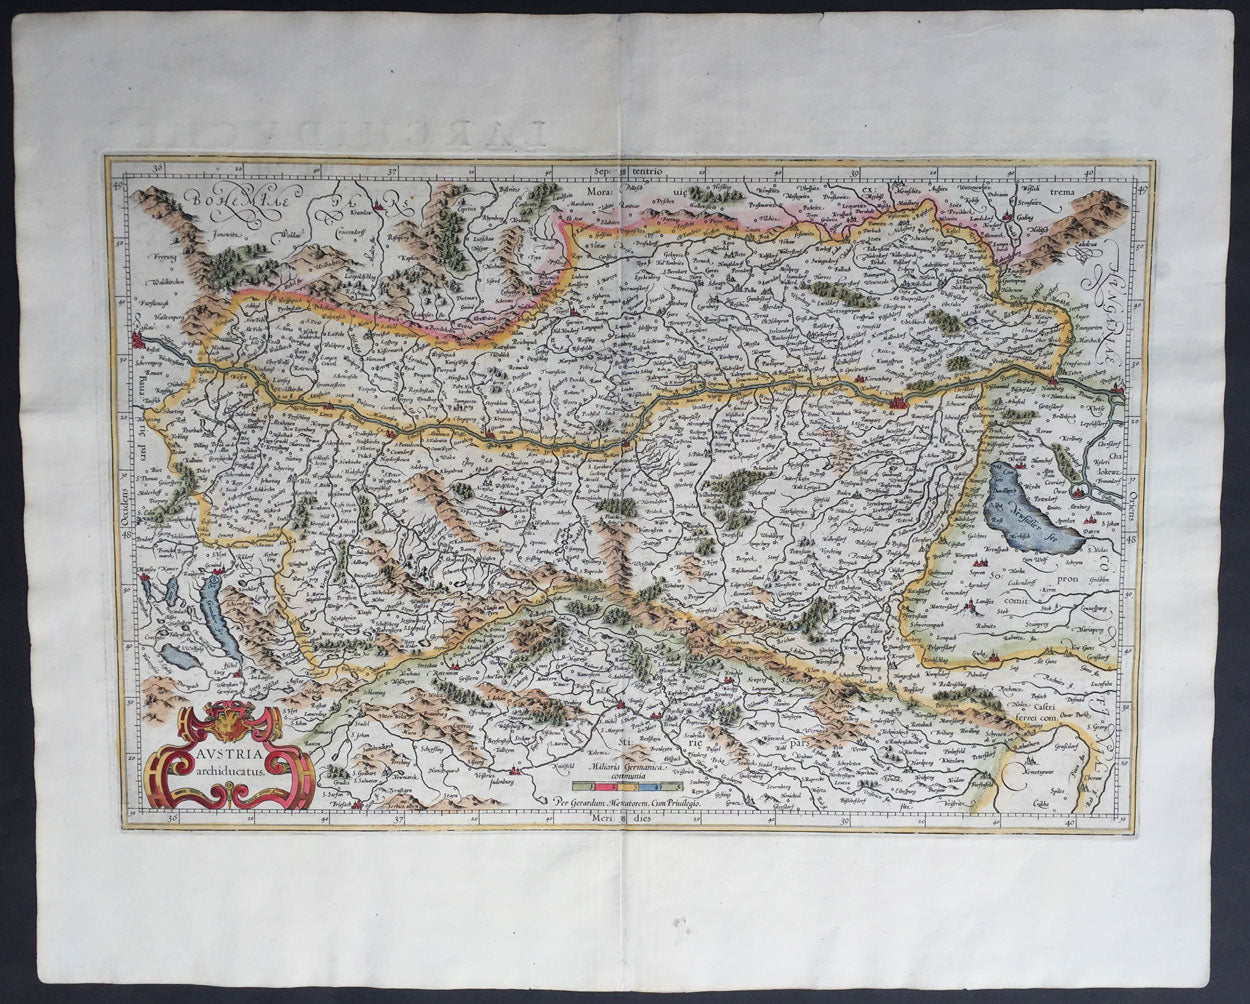 Antique map of Southern Italy by G. Mercator